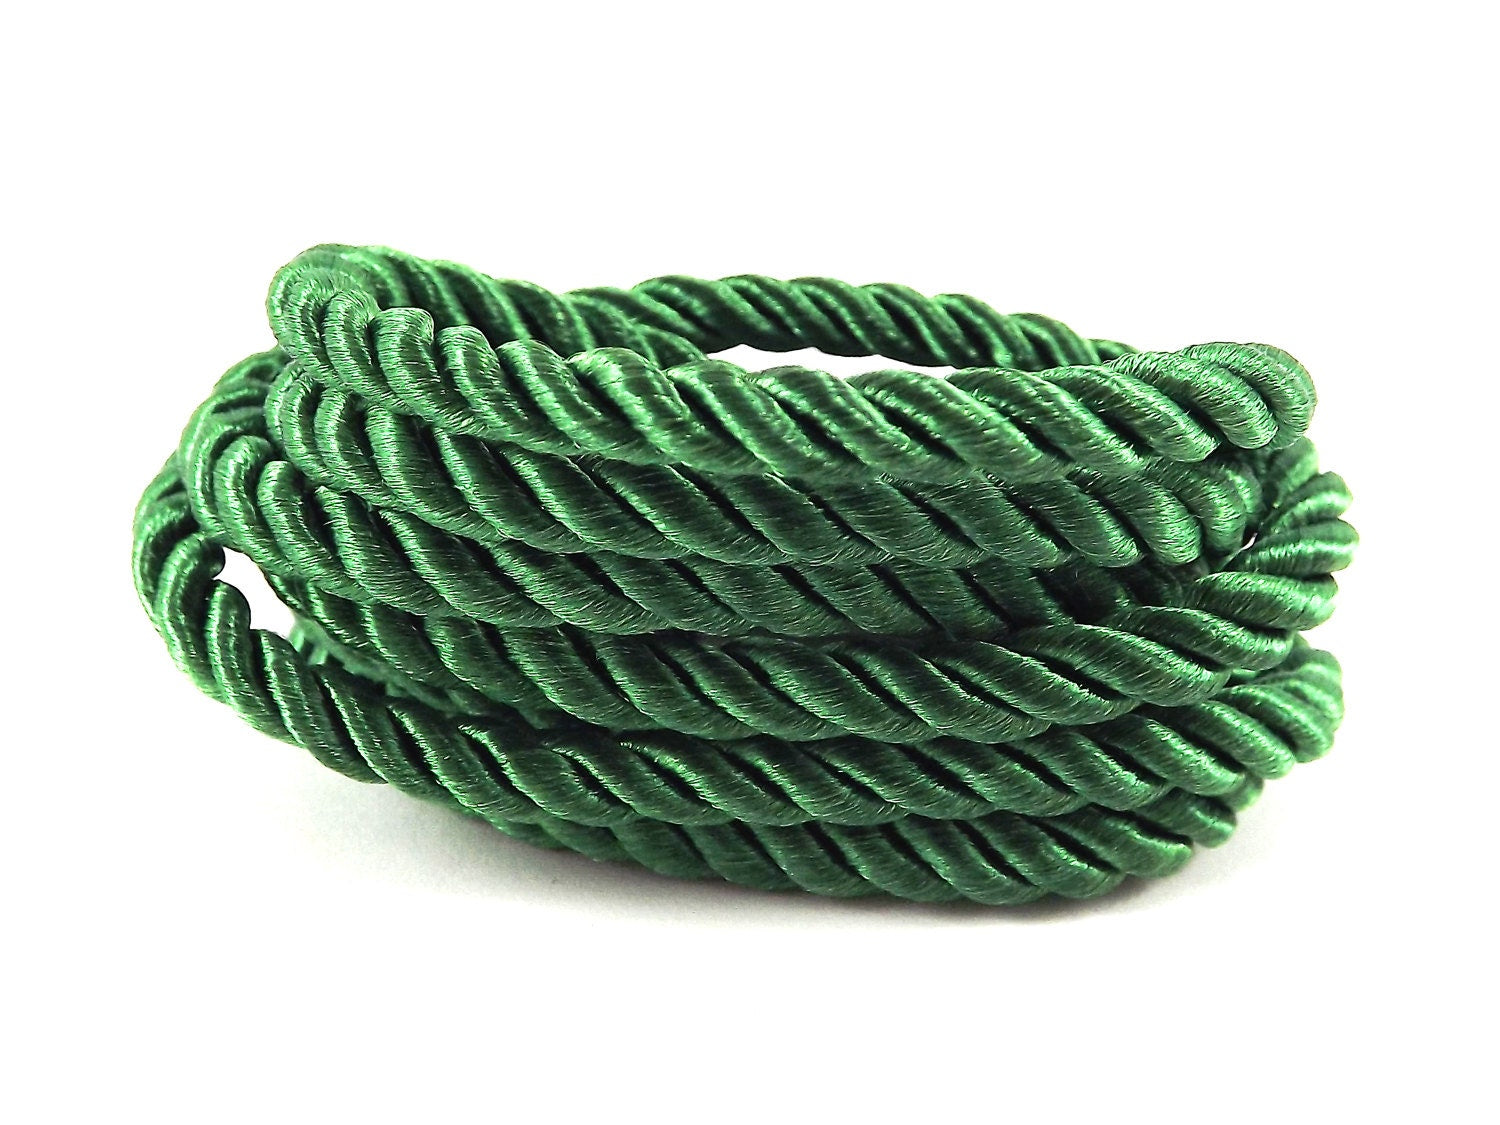 Forest Green Rope 3.5mm Cord Rayon Satin Rope Silk Braid, Twisted Rope Jewelry Necklace Cord  - 3 Ply Twist - 1 meters - 1.09 Yards - No:17